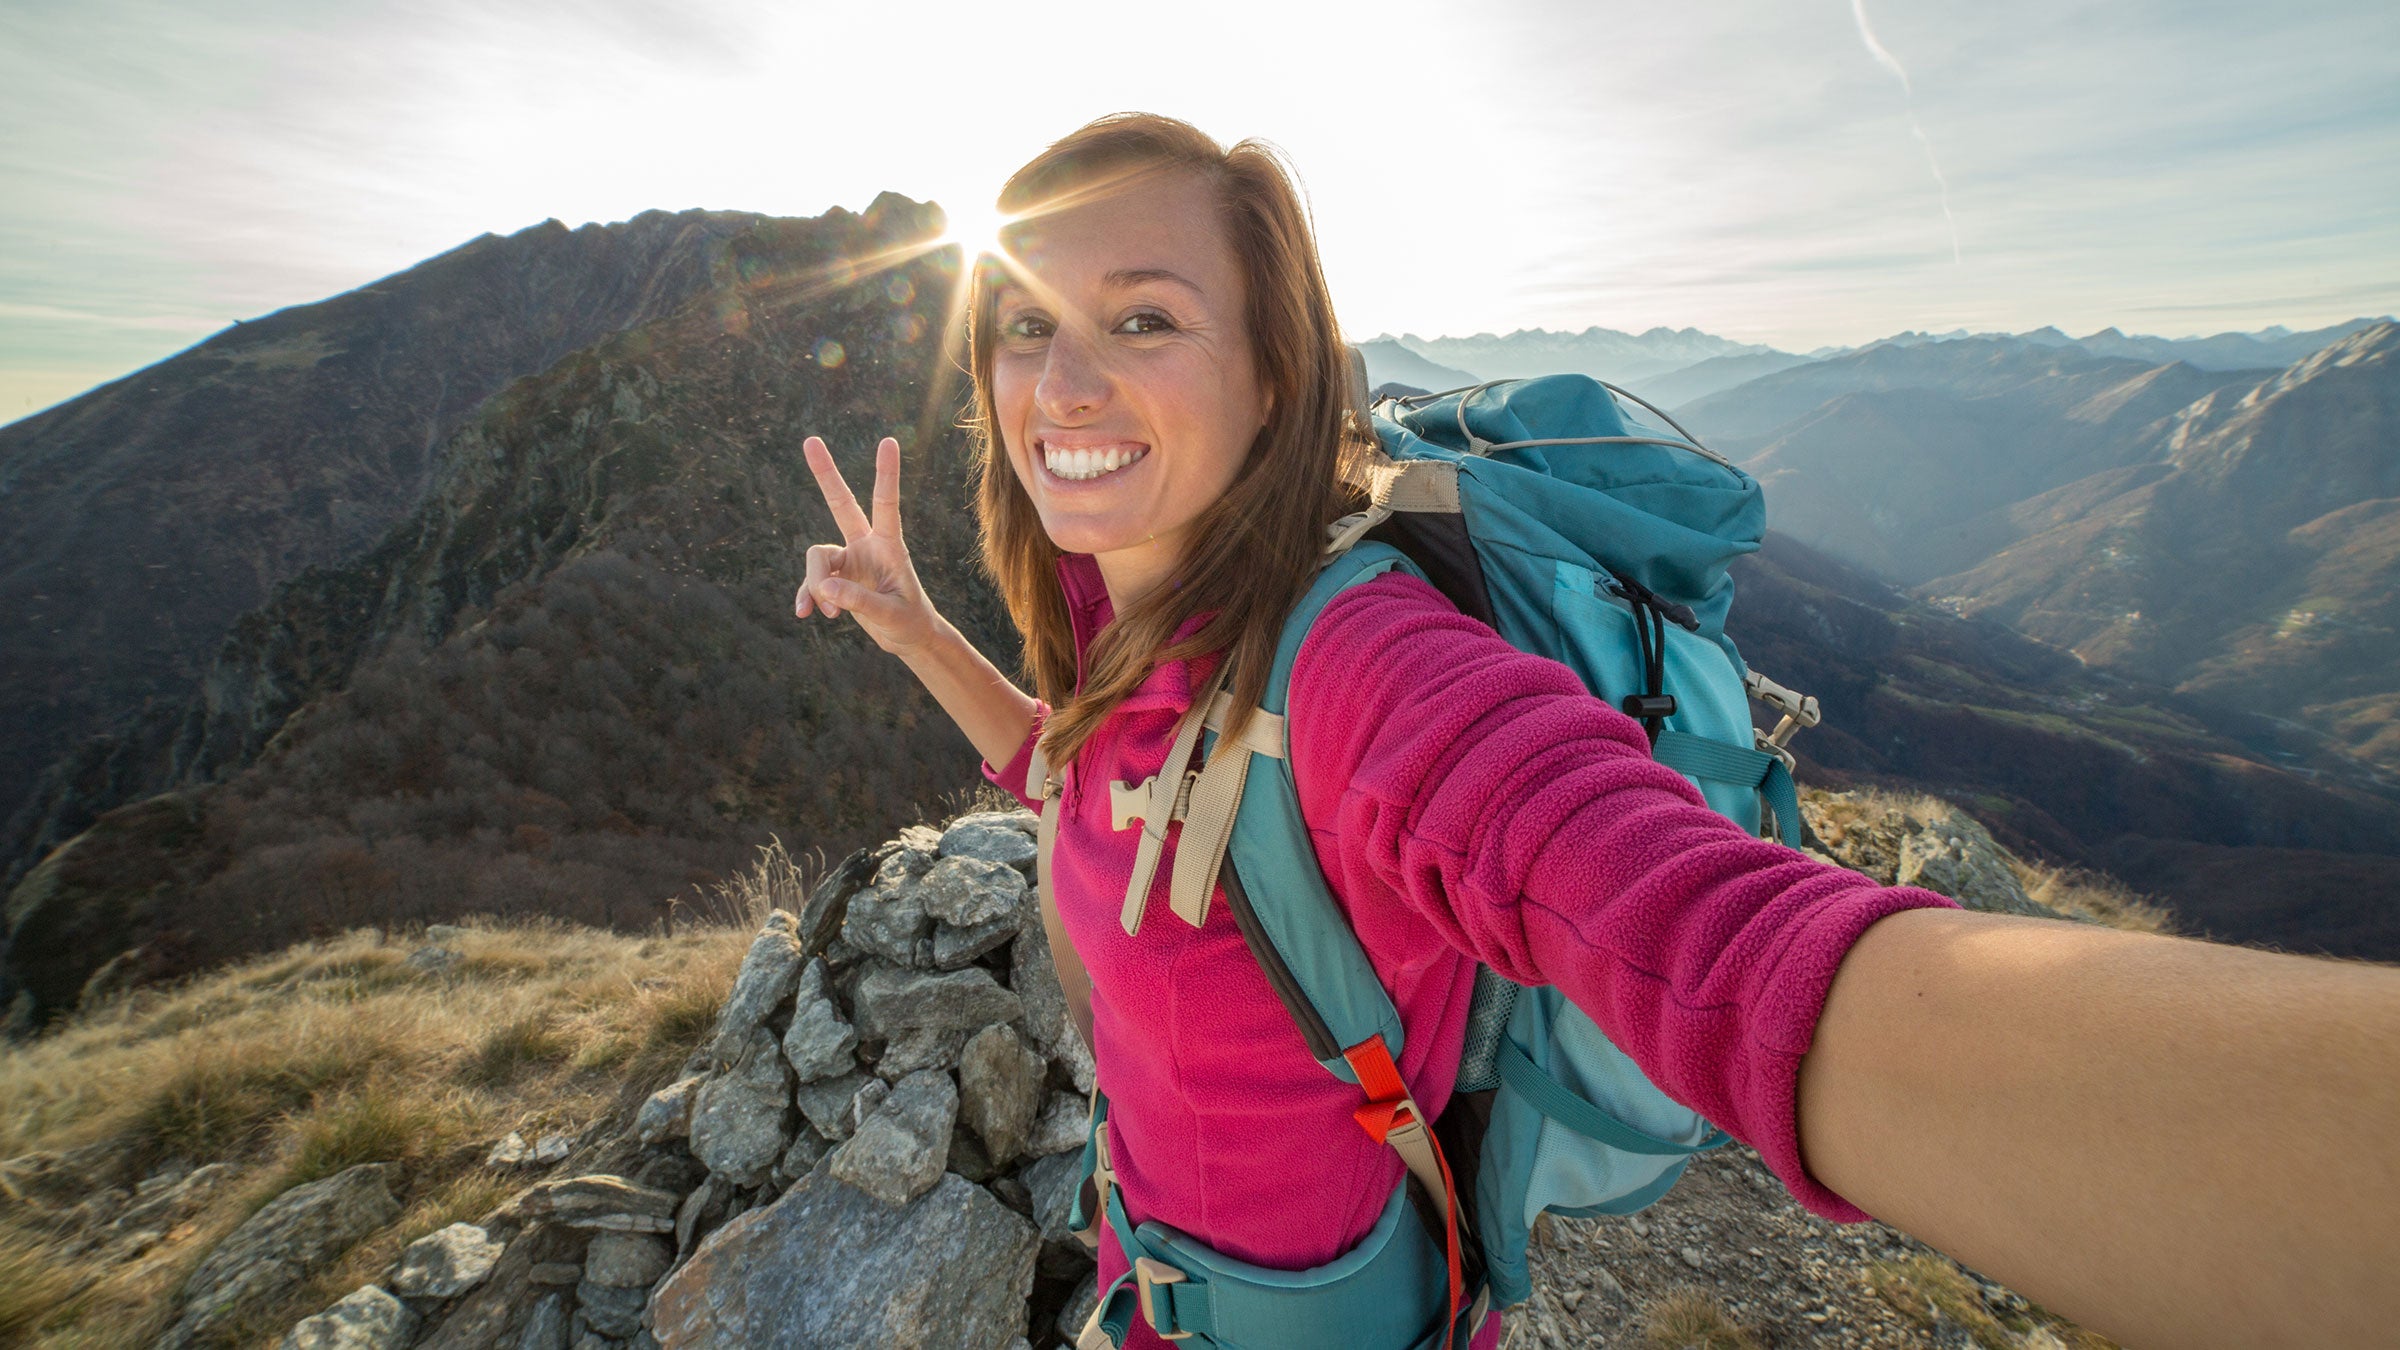 How to Cope When Your Partner Thru-Hikes Solo - Outside Online